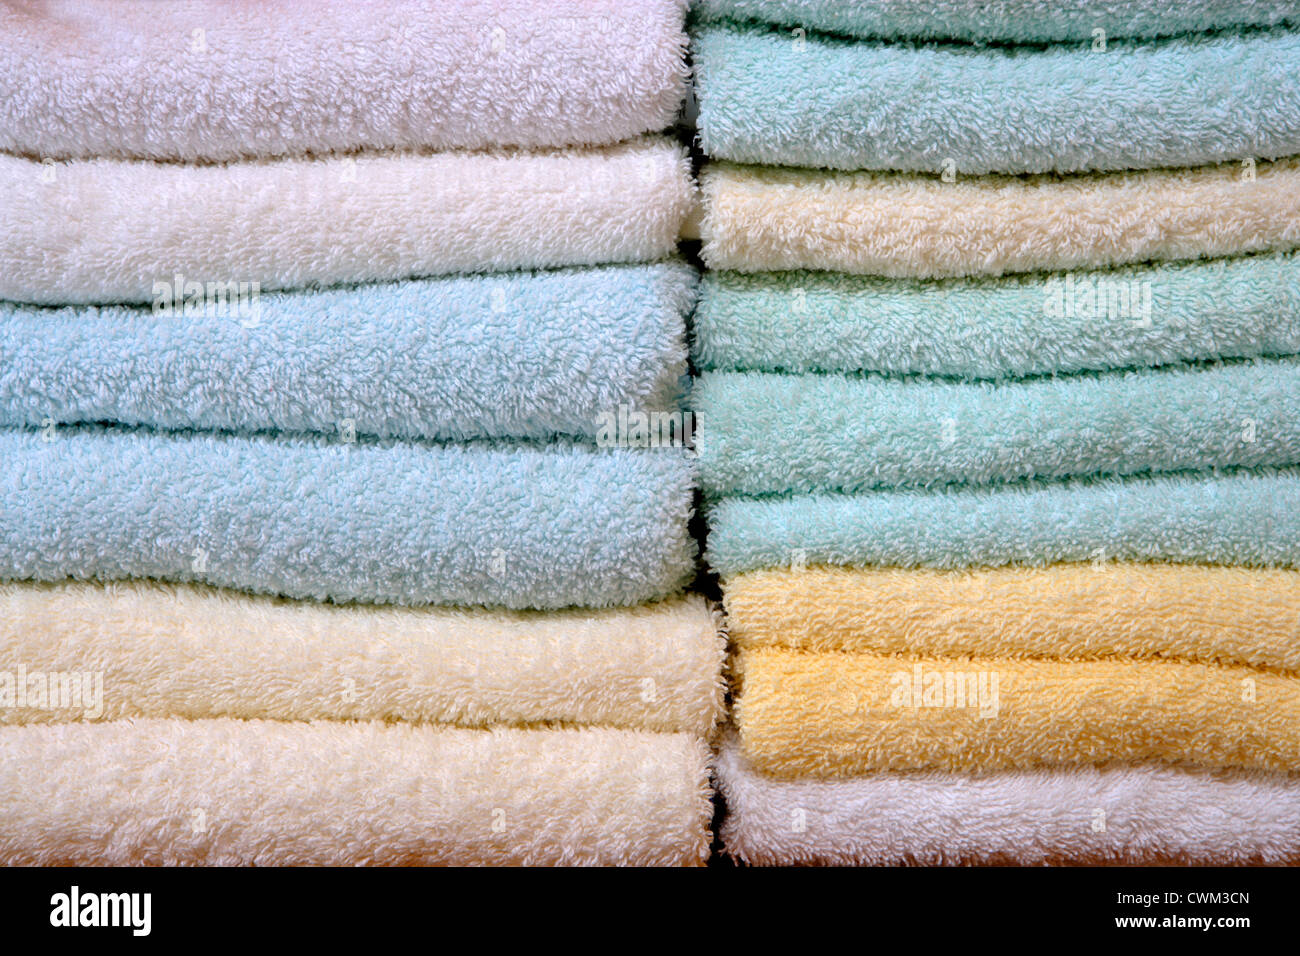 multicolored folded terry towels Stock Photo